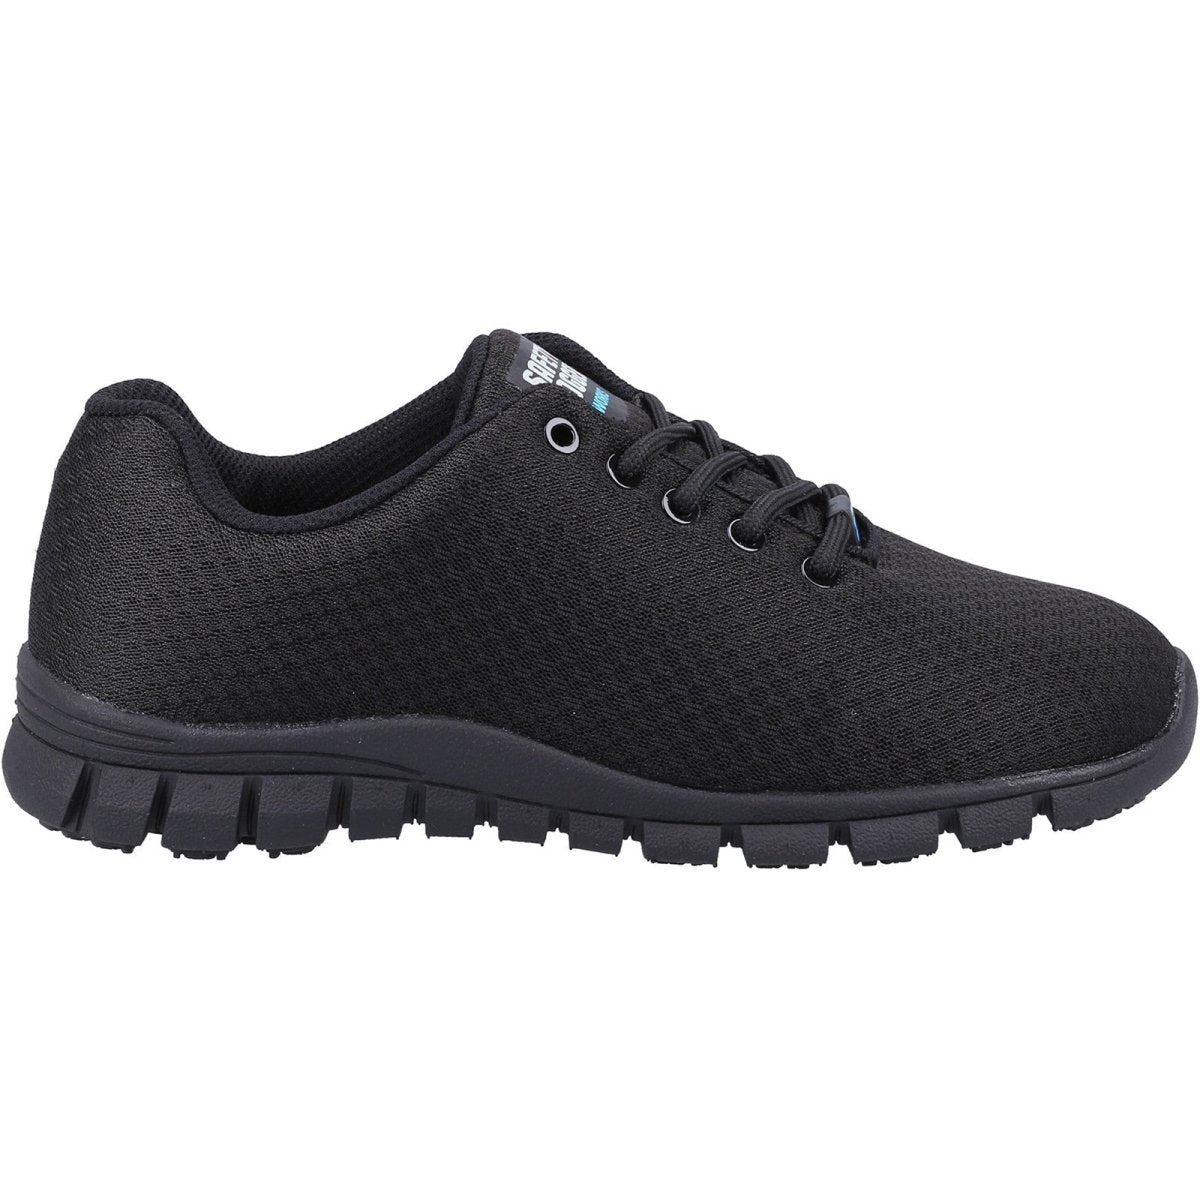 Safety Jogger Kassie O1 SRC Occupational Work Sneaker - Shoe Store Direct